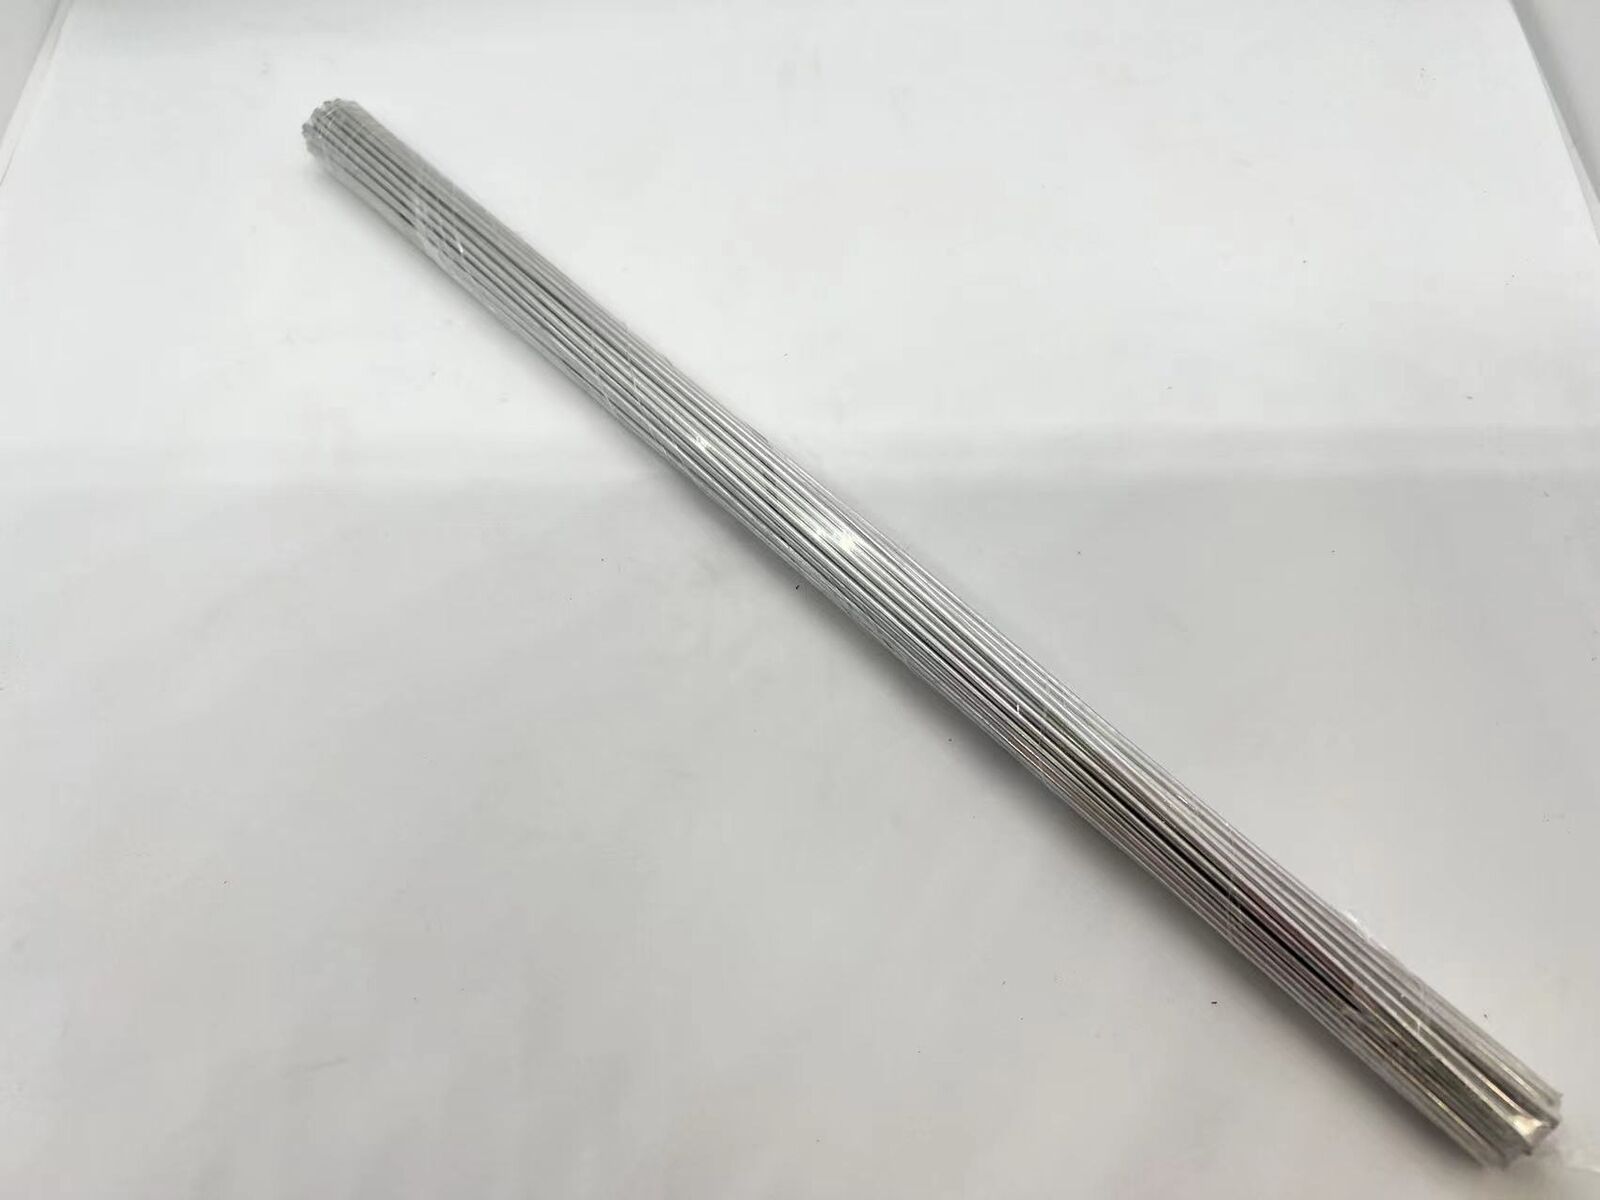 Tuanie Lnanqing-Welding Wire 330mm Aluminum Welding Electrodes